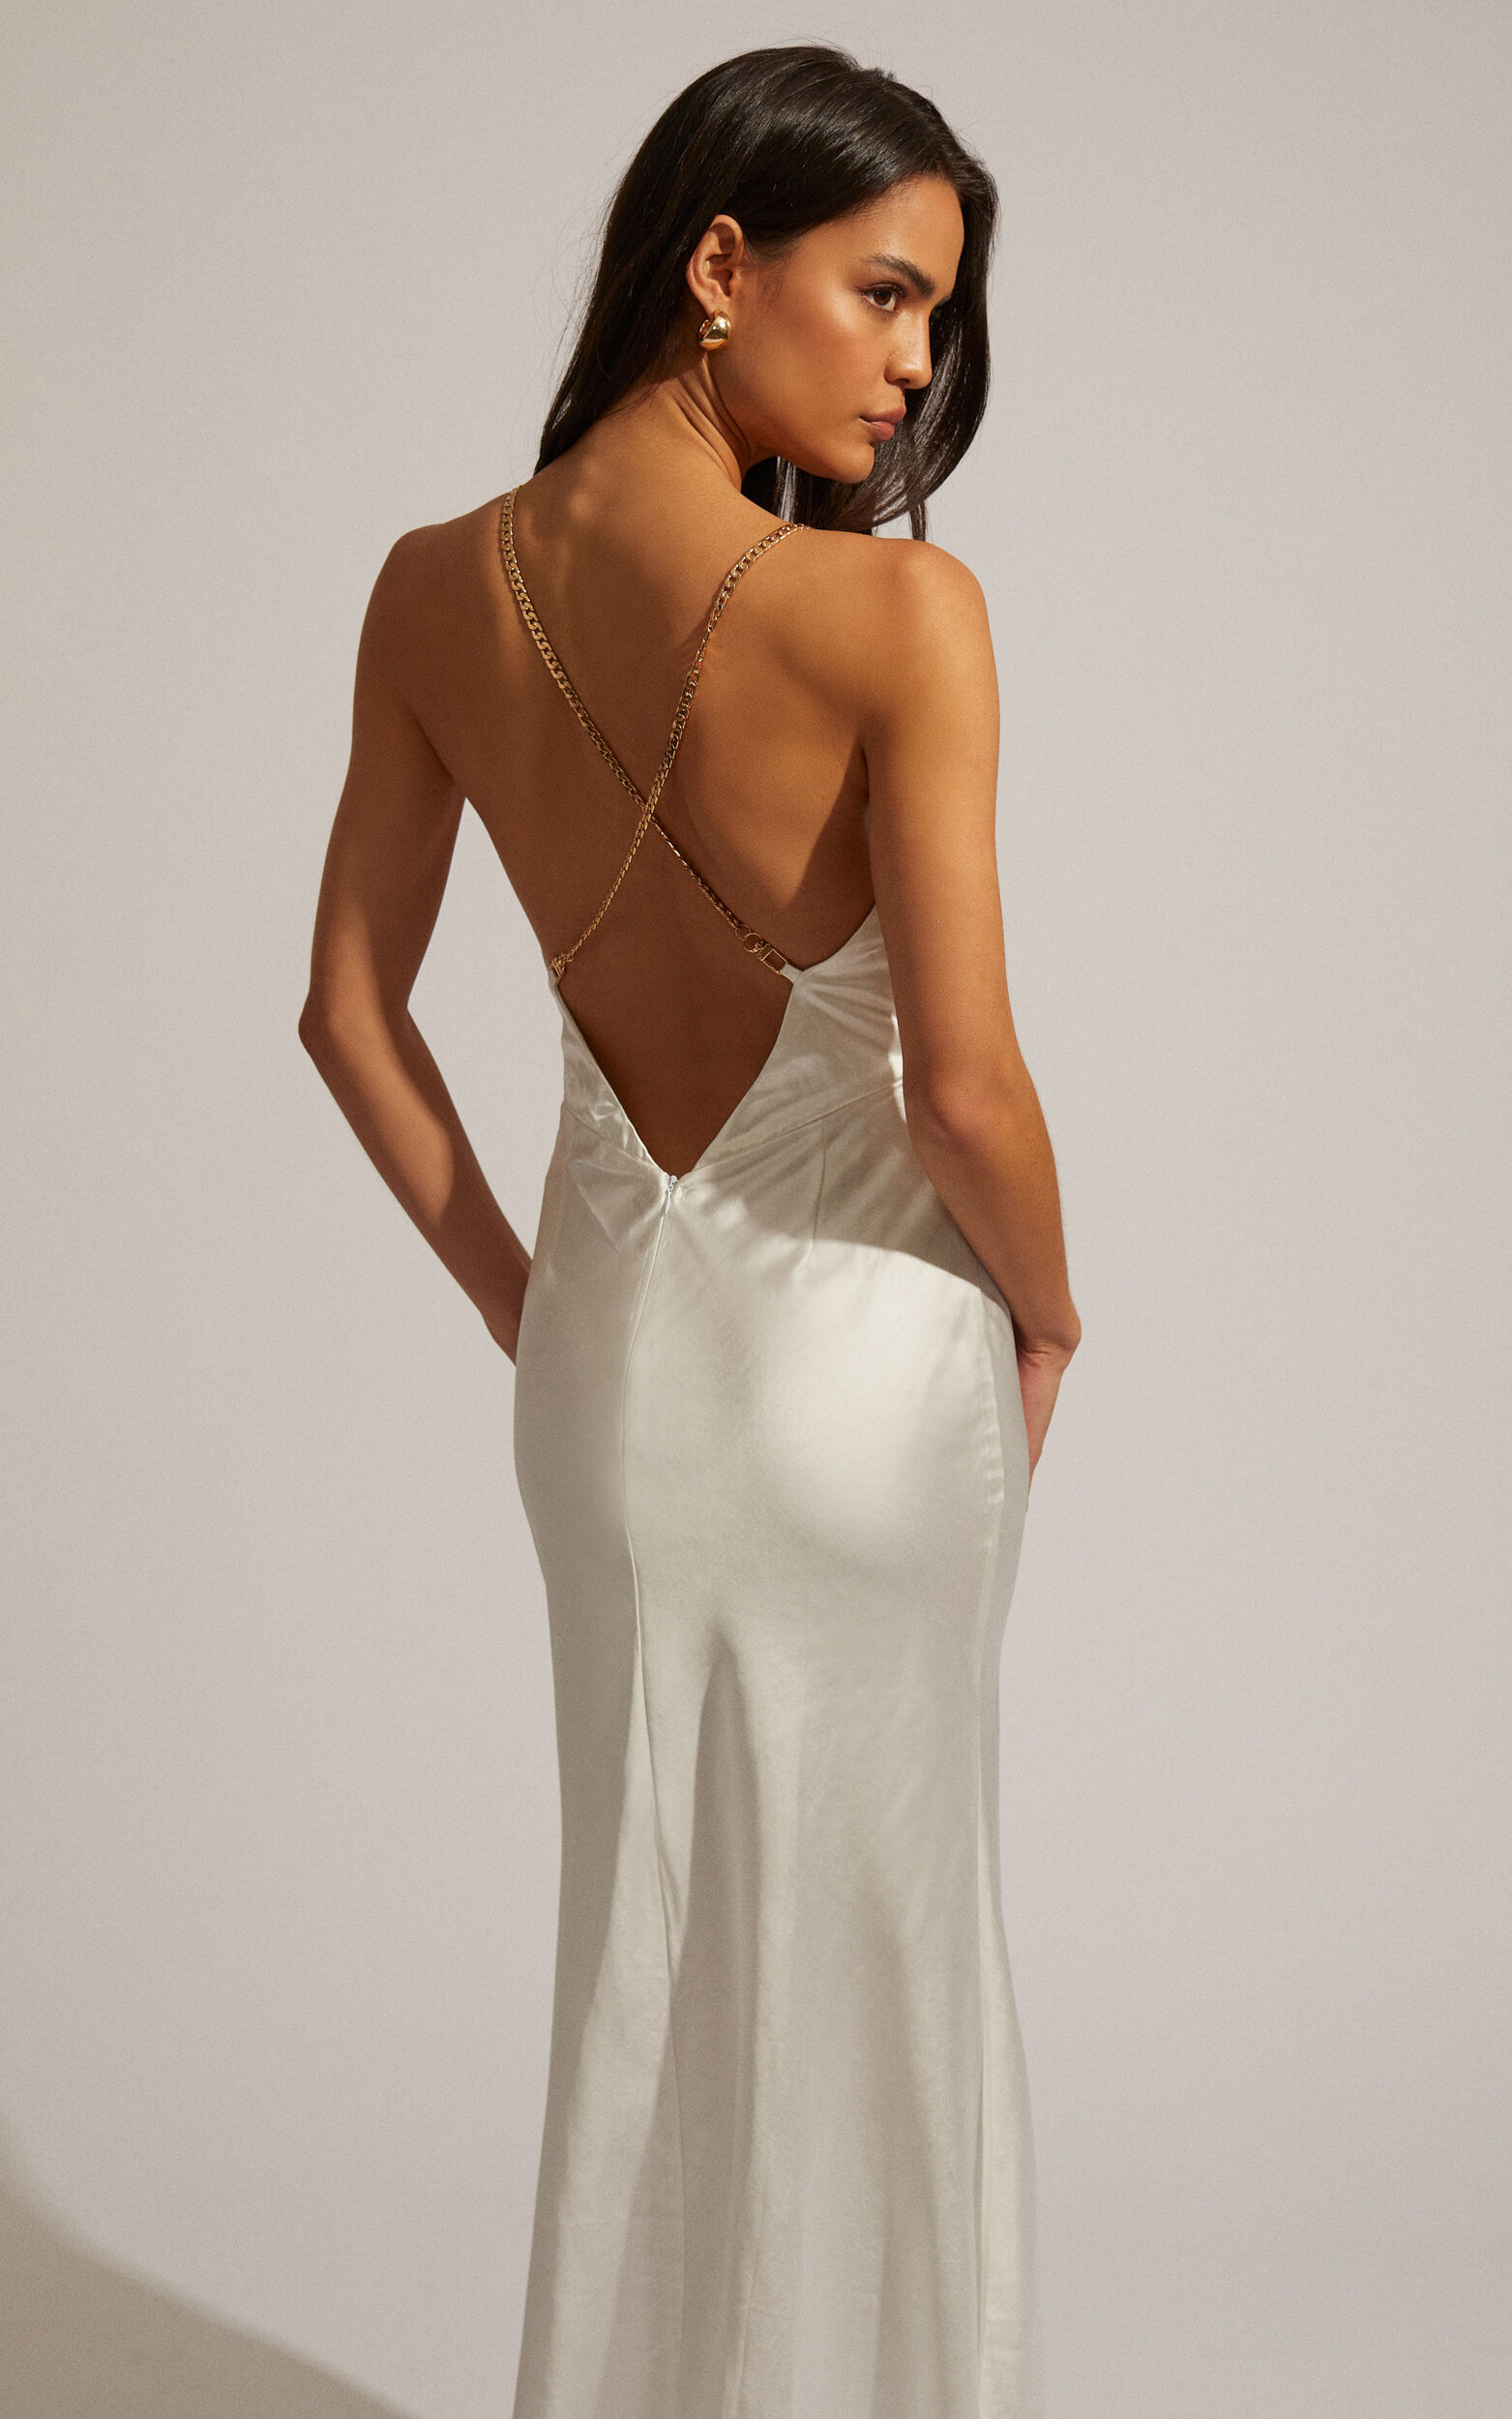 Cheche Chain Strap Plunge Bias Cut Satin Maxi Dress in Pearl - 04, PRL2, super-hi-res image number null